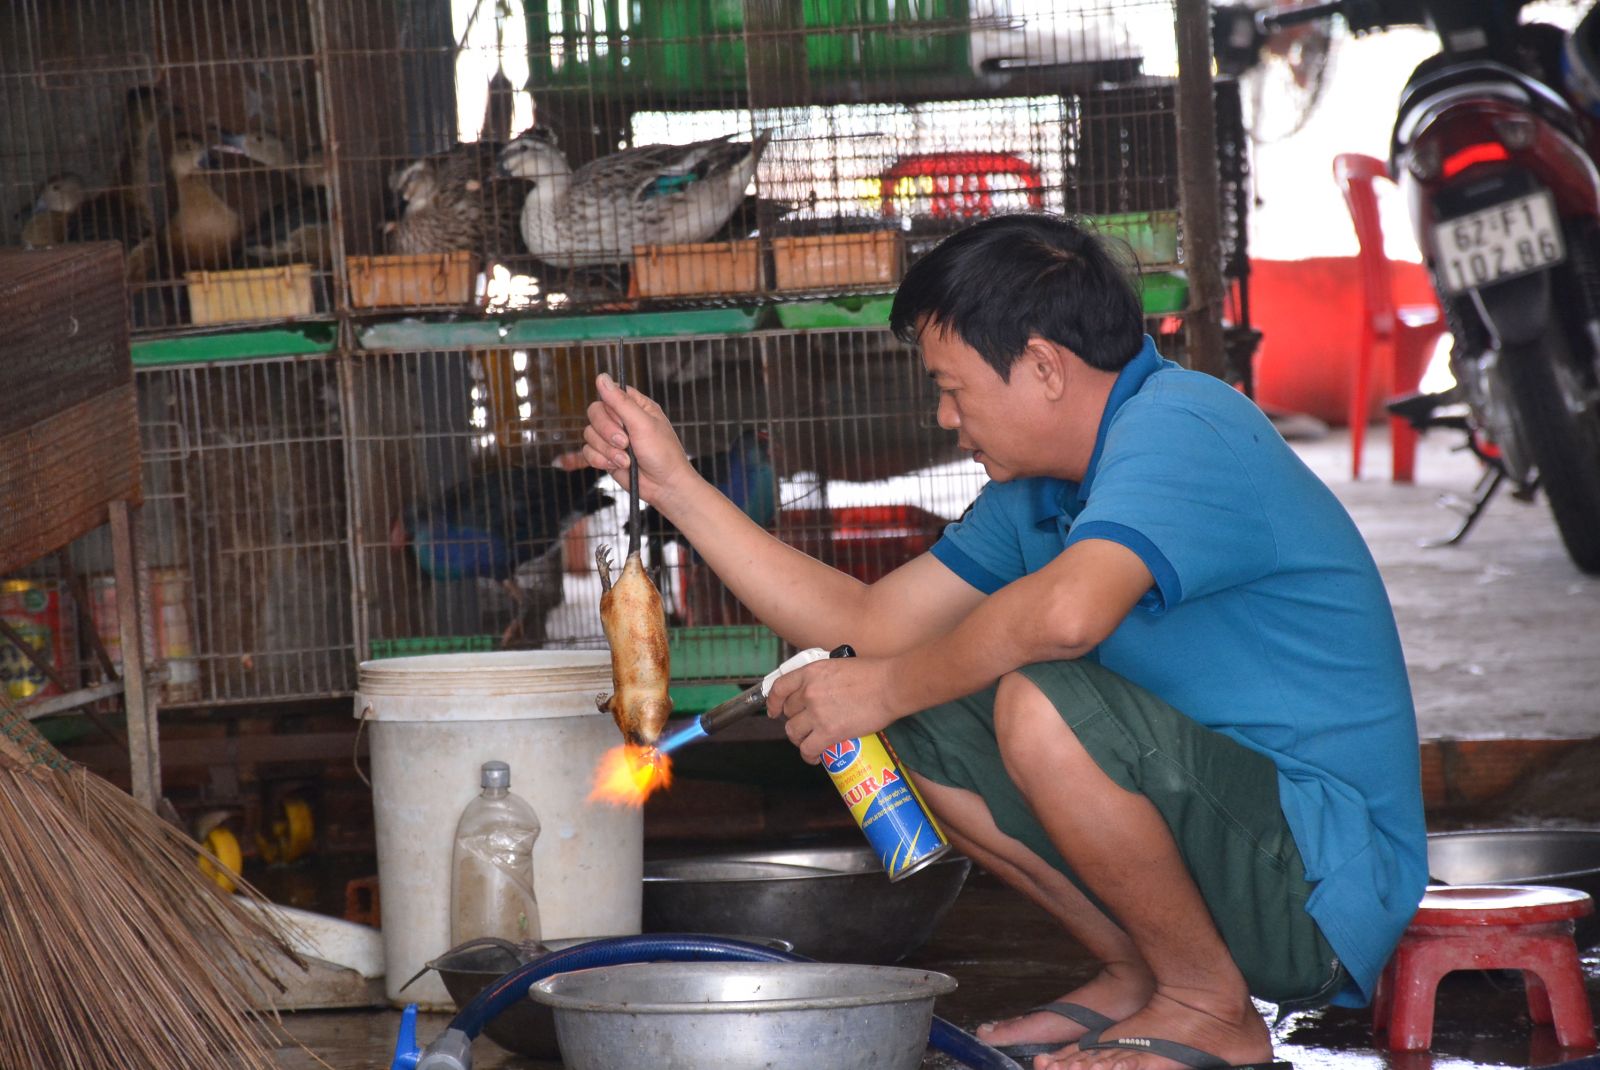 Presently, Thanh Hoa Agricultural Product Market has 31 households trading wildlife animals